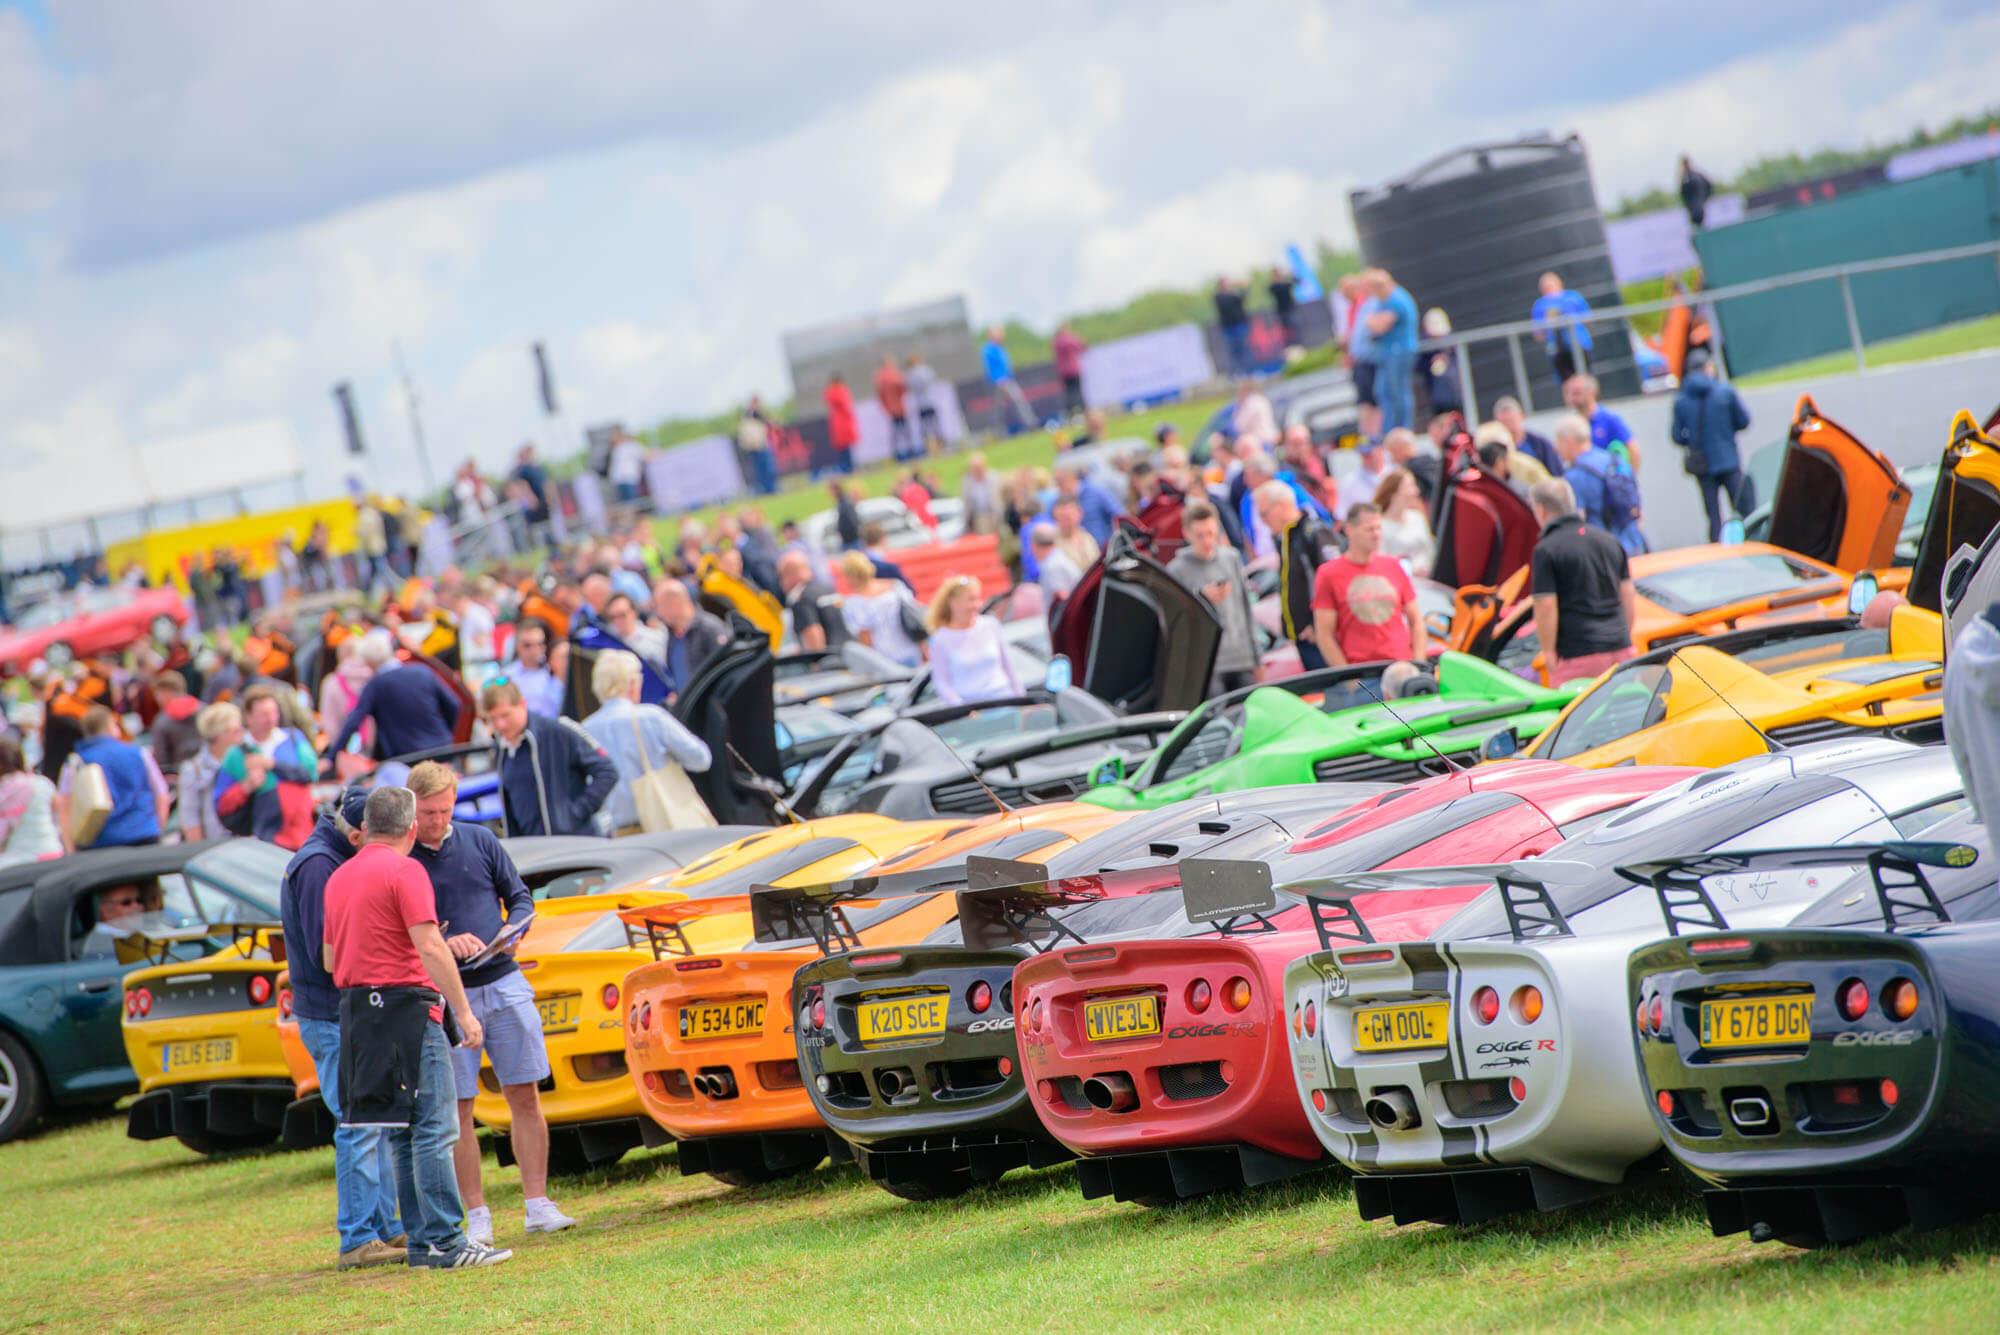 A line-up of brightly coloured classic cars displayed as part of a Car Club at The Classic at Silverstone and a crowd of people looking at the display